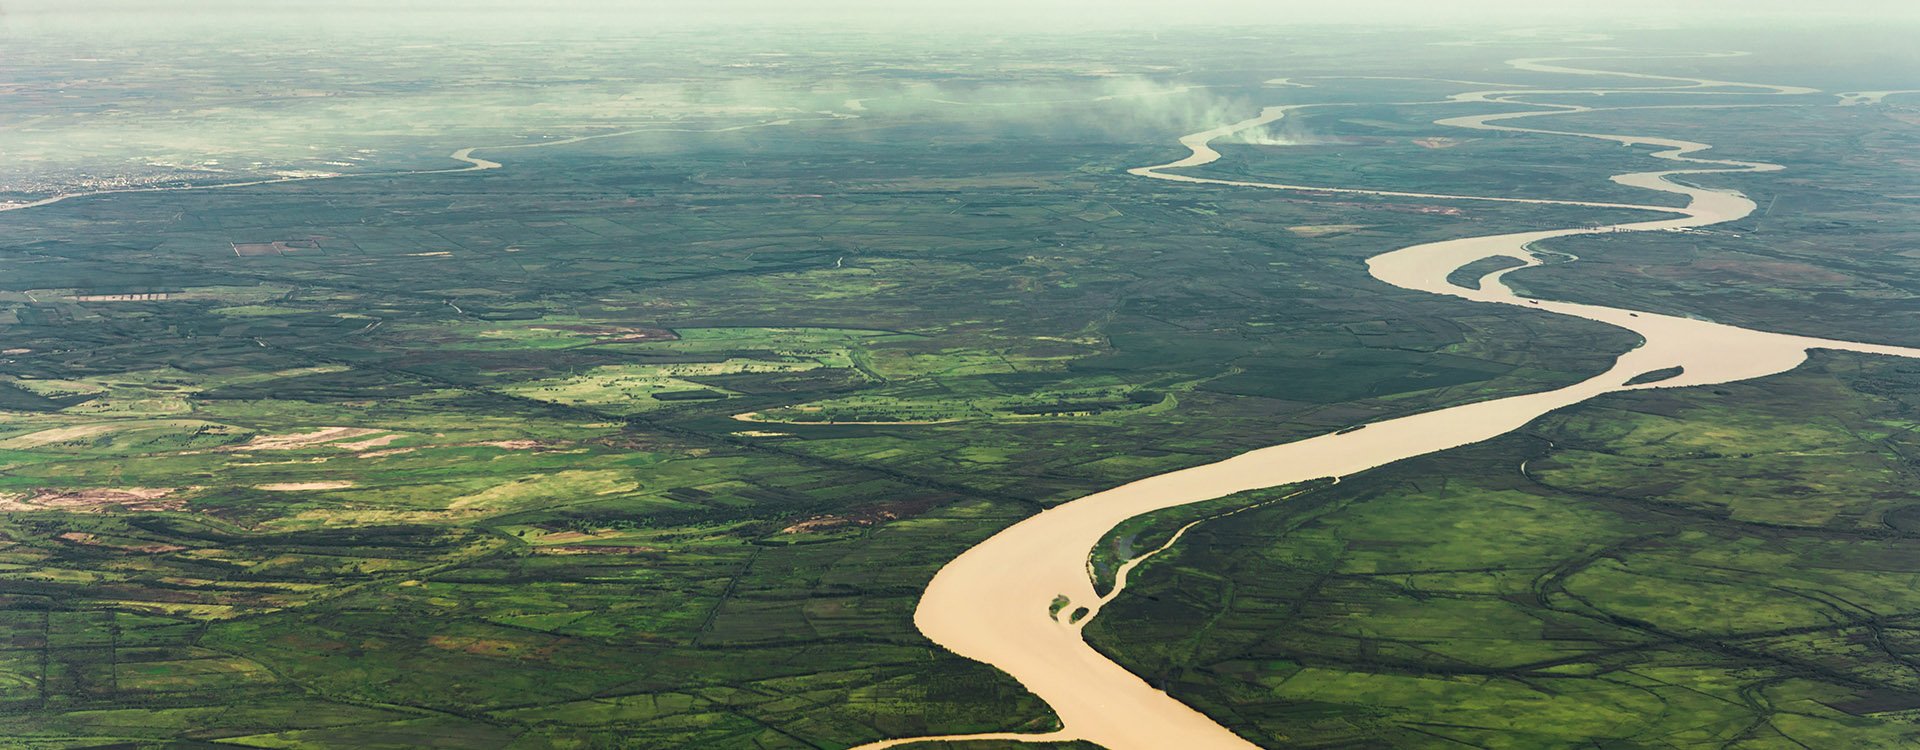 Landscape aerial view of colorful Amazon rivers, forest with trees, jungle, and fields